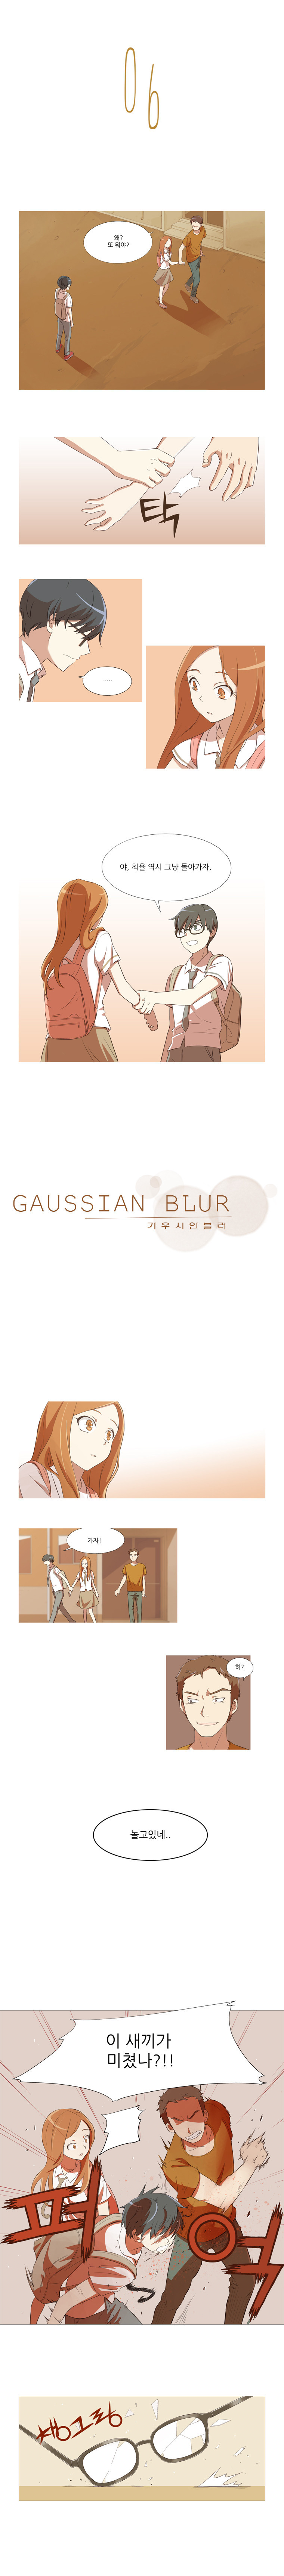 Gaussian Blur - Chapter 06 - Page 1